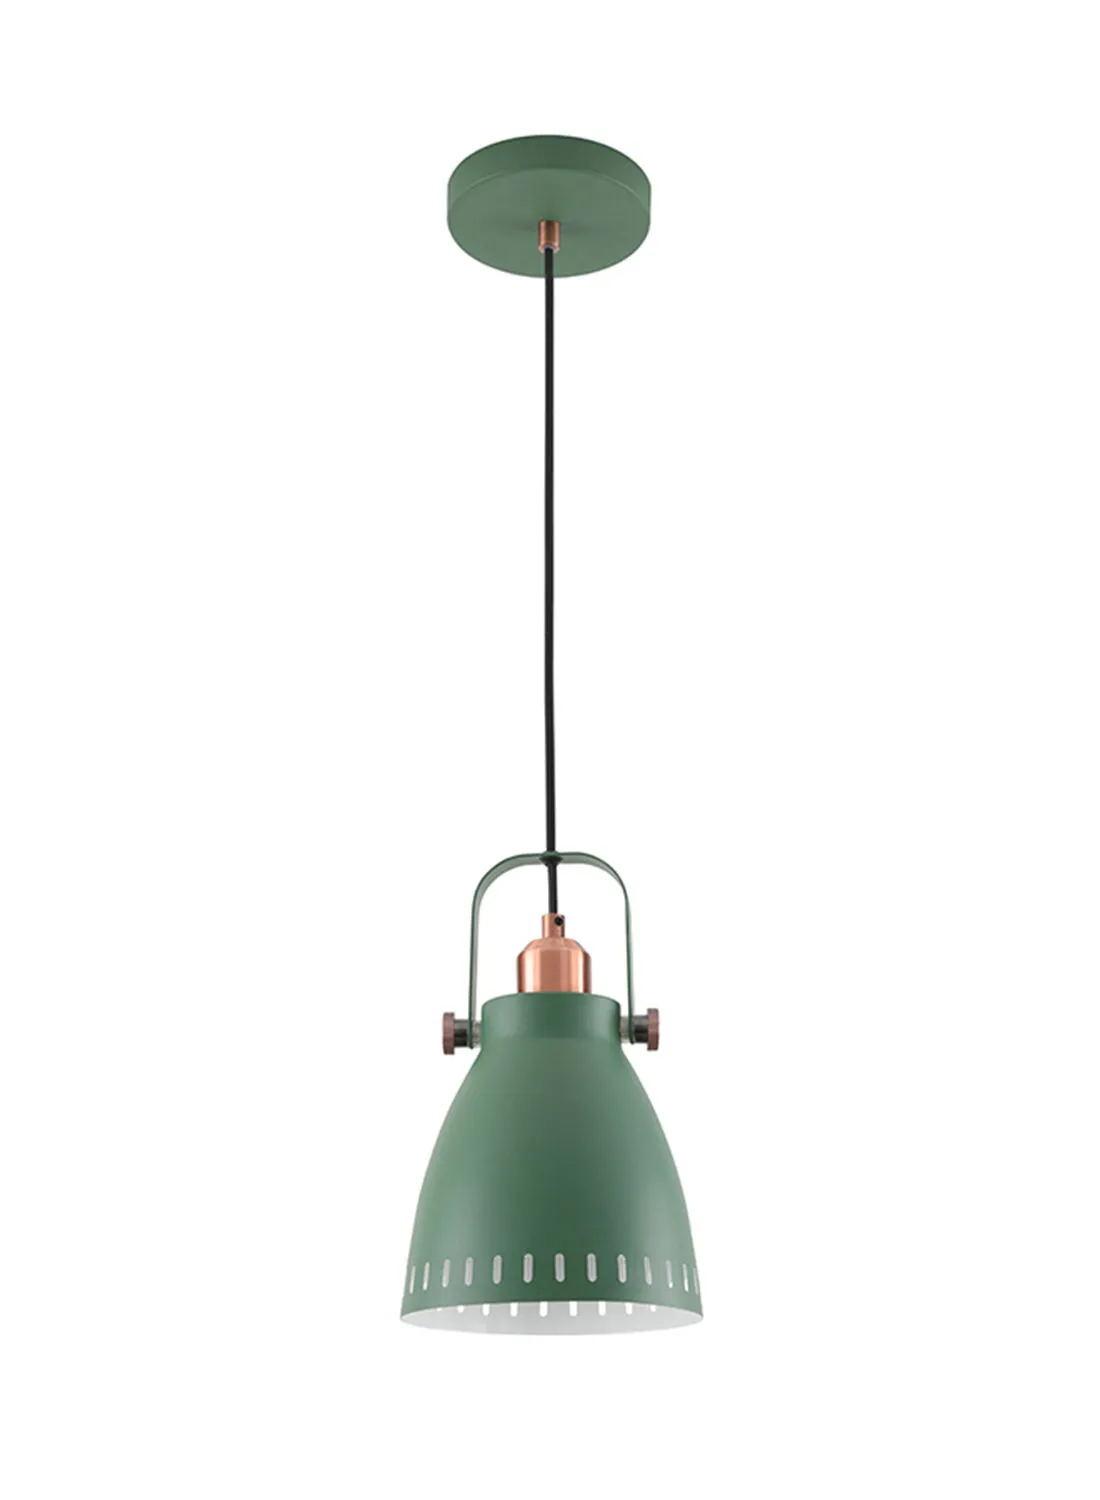 Switch Elegant Style Pendant Light Unique Luxury Quality Material for the Perfect Stylish Home Green Sand Green/Red Copper